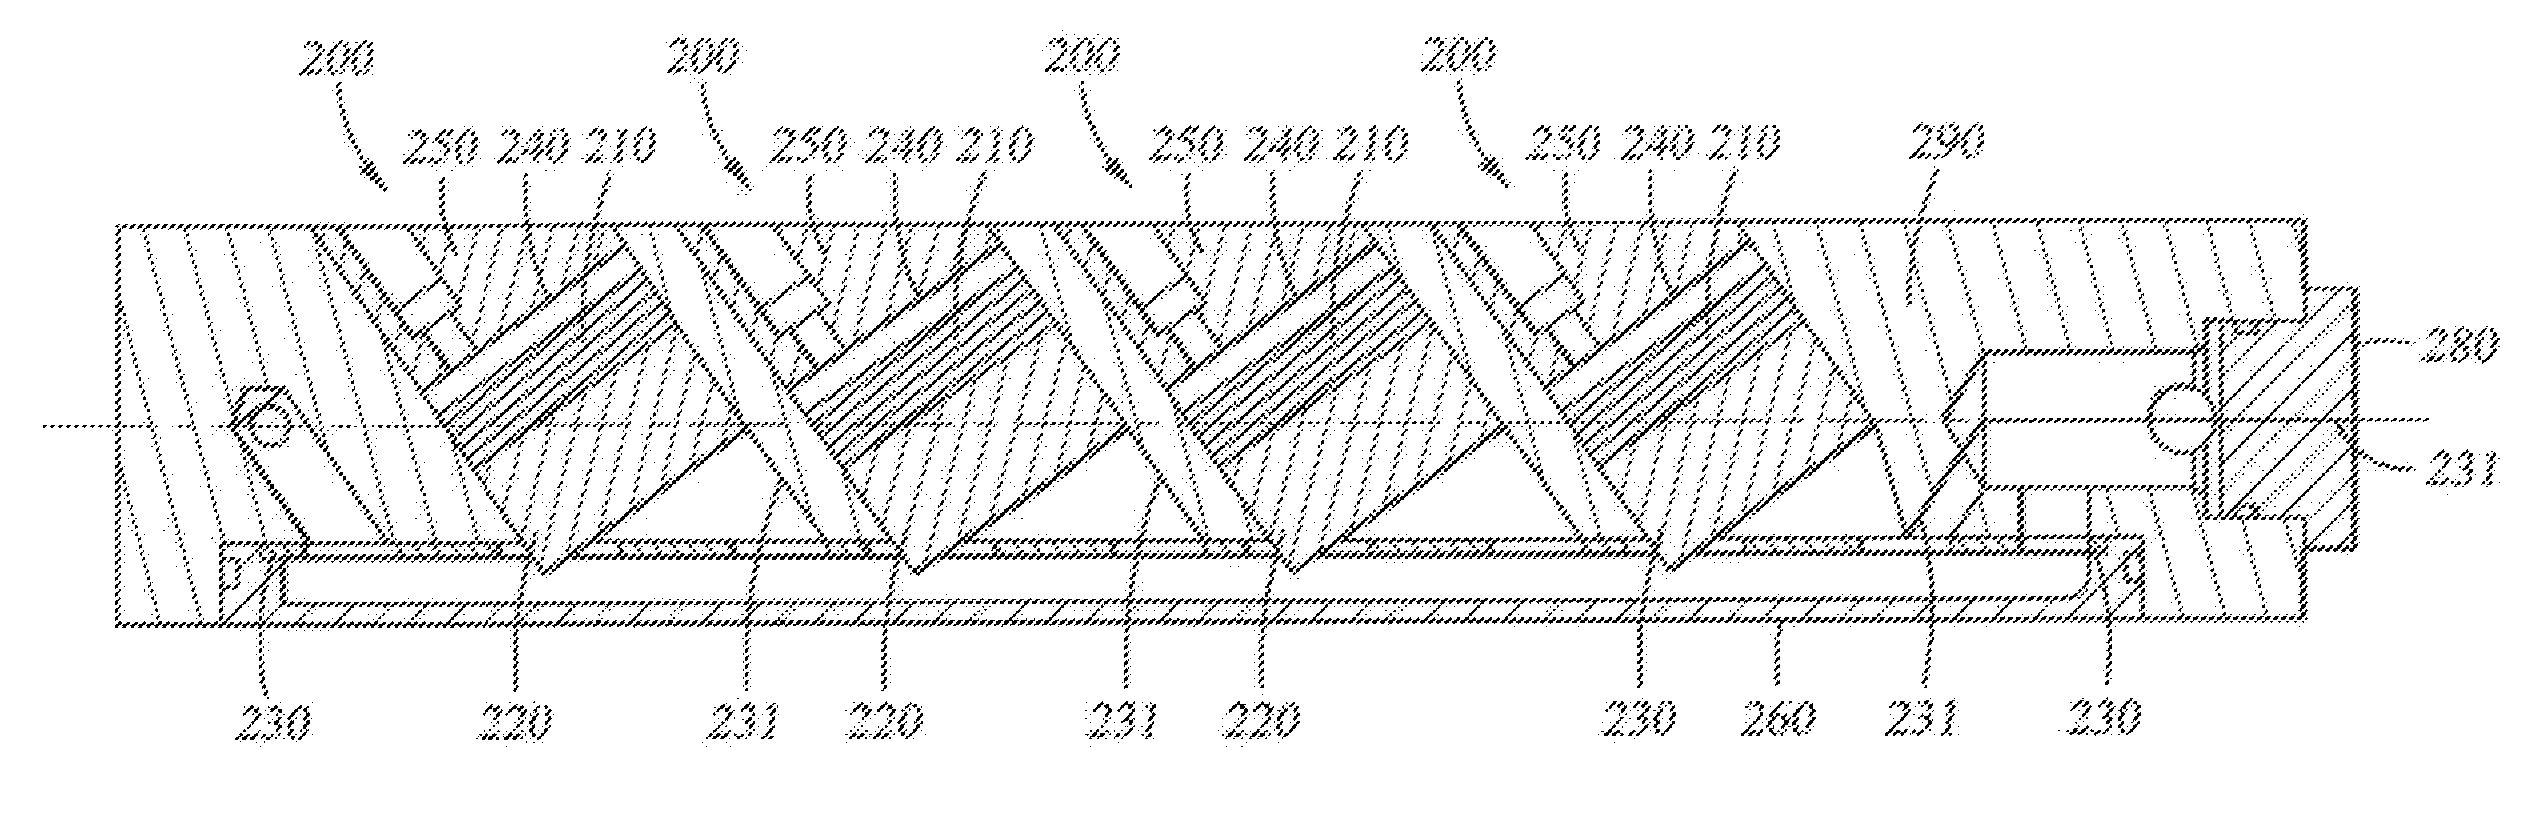 Enclosures for Containing Transducers and Electronics on a Downhole Tool